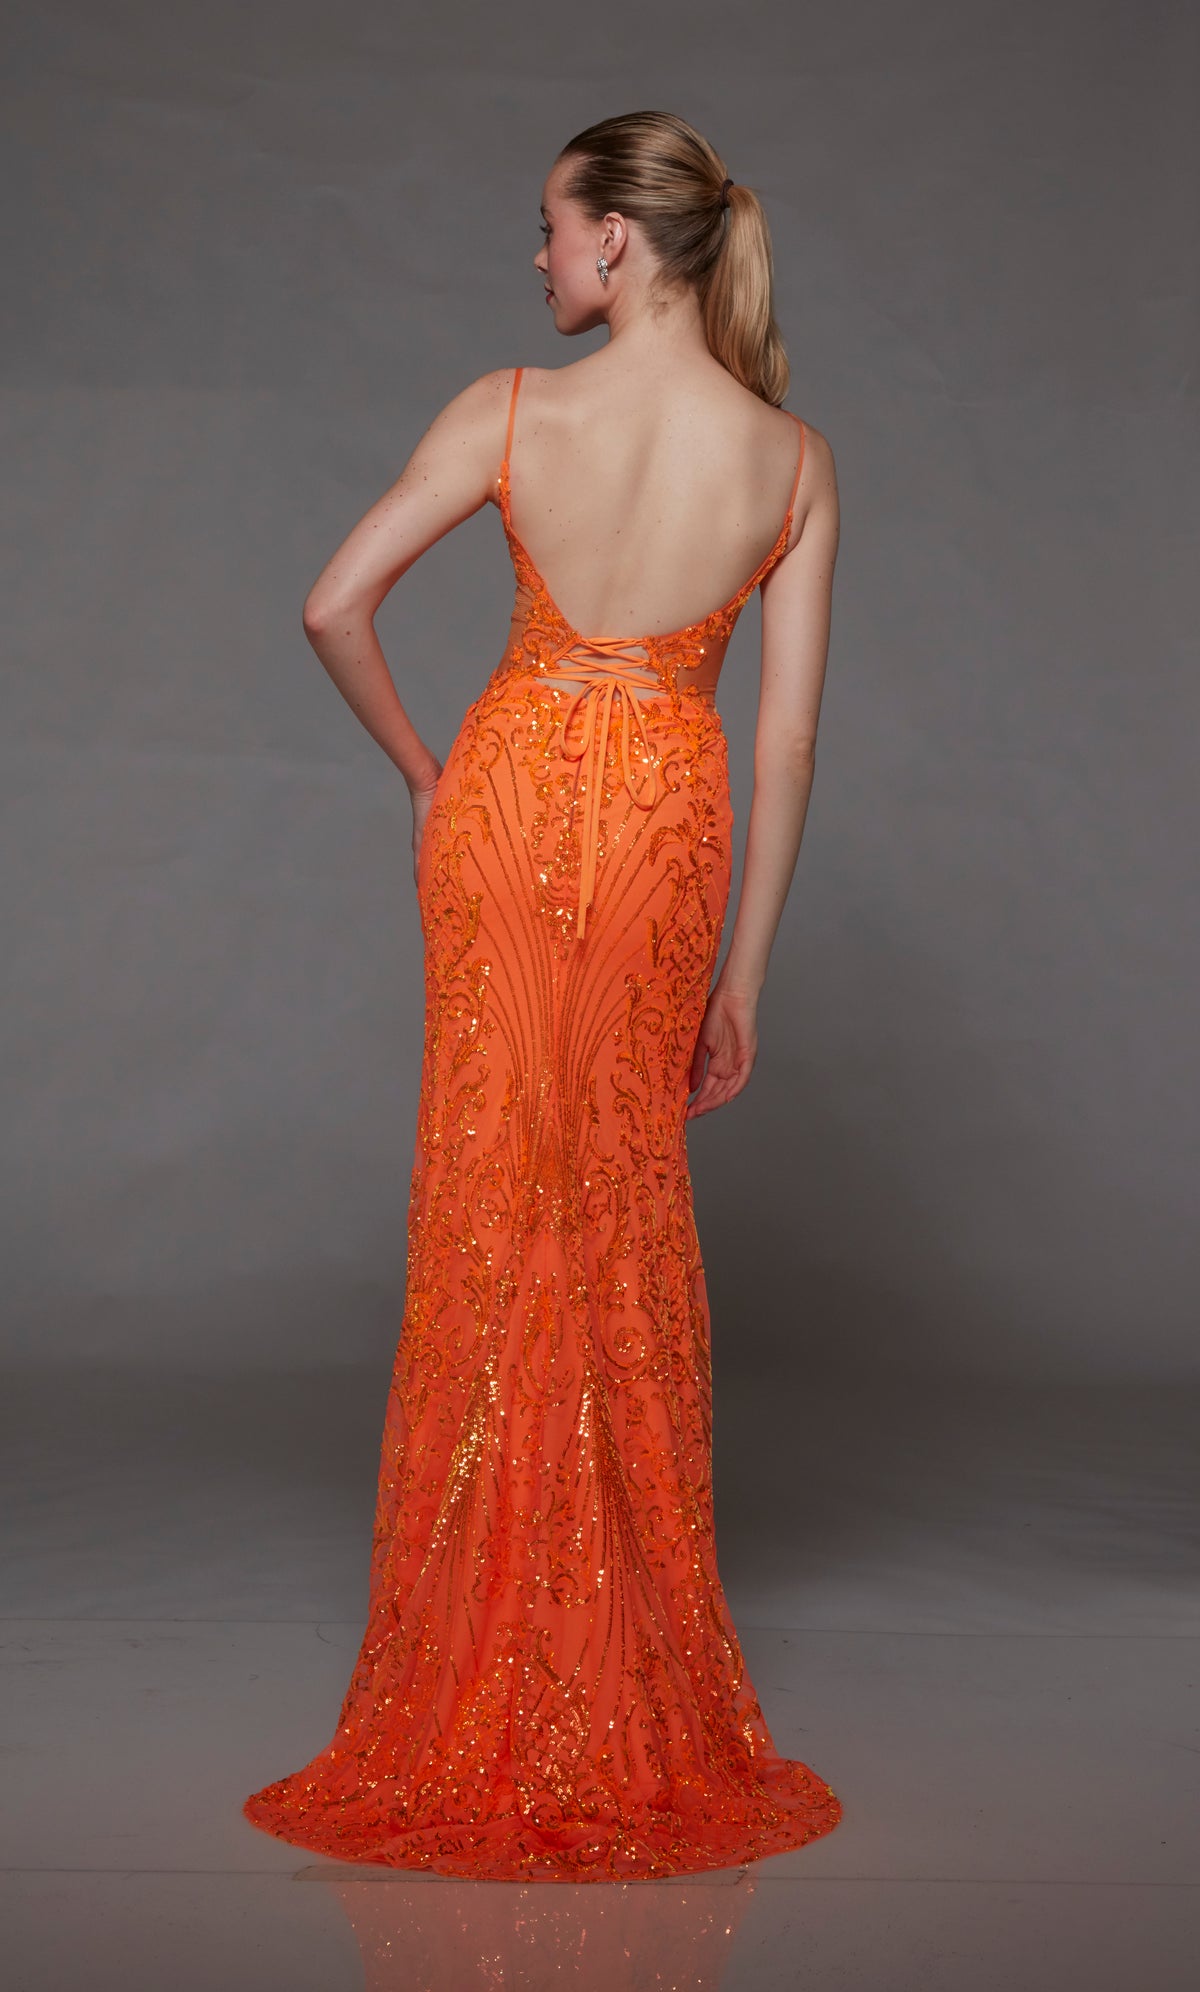 Bright orange sequin formal gown: plunging neckline, front slit, lace-up back, slight train. A stunning choice for an elegant and glamorous occasion.